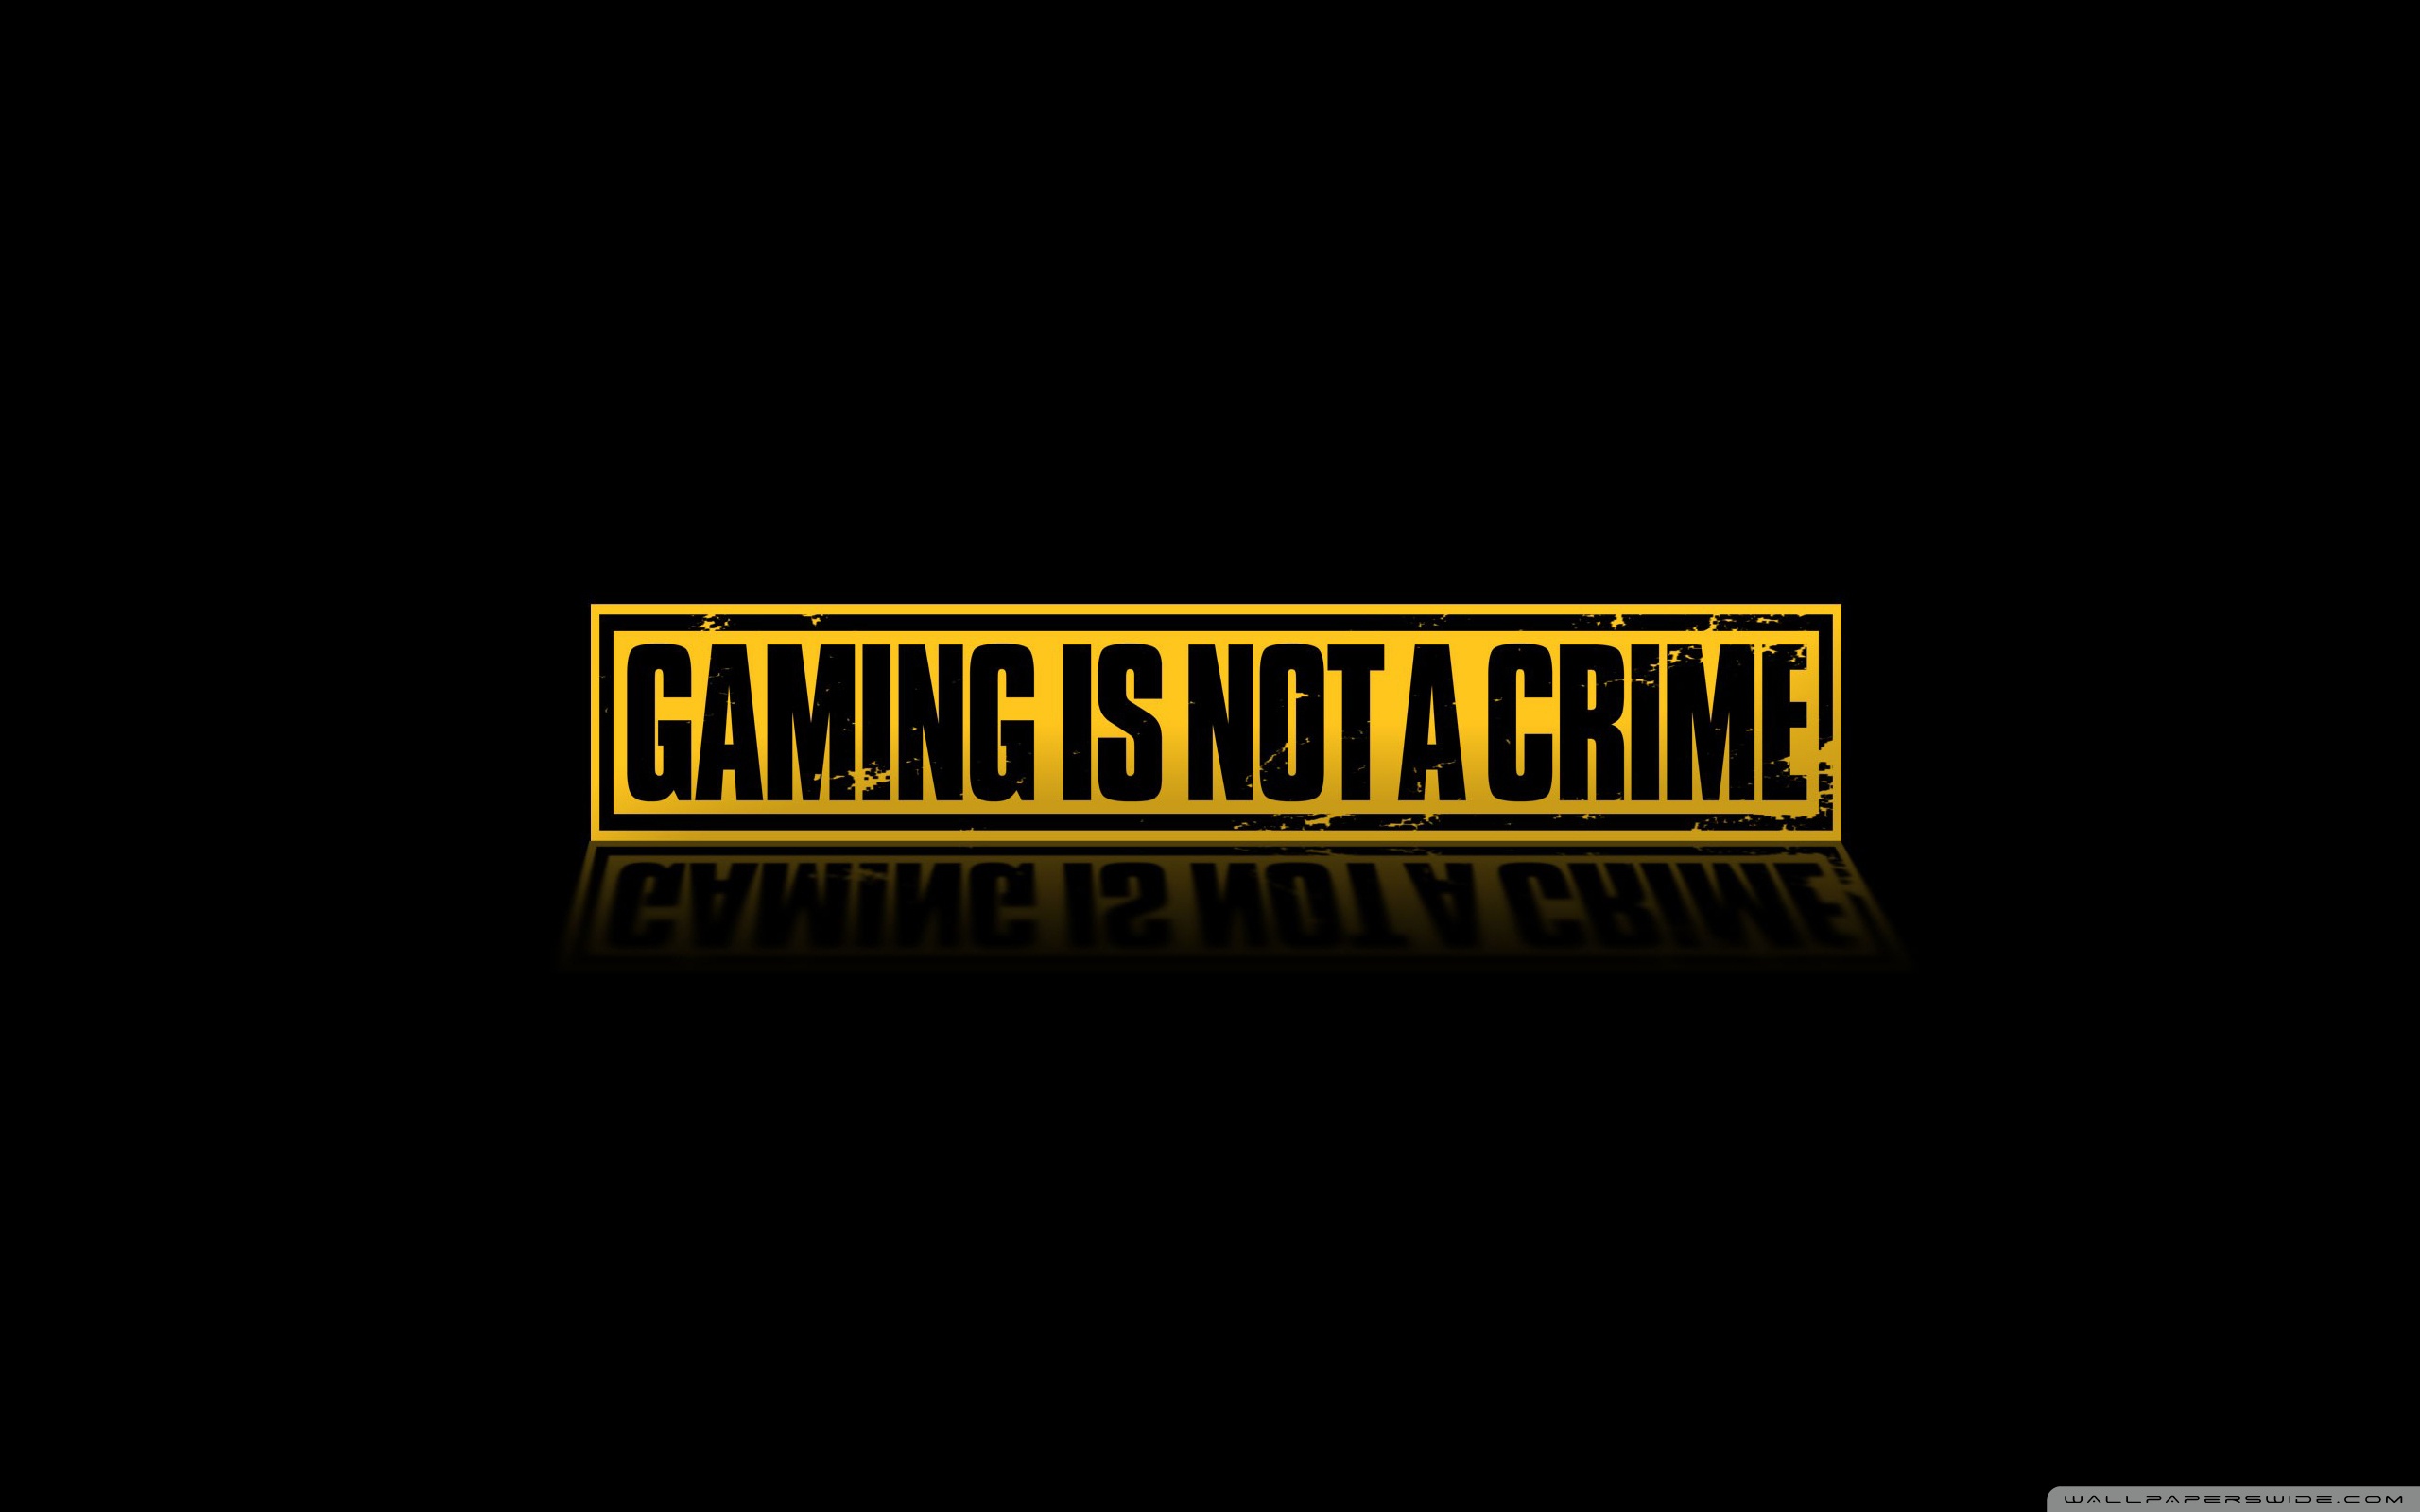 Gaming Is Not A Crime Ultra Hd Desktop Background Wallpaper For 4k Uhd Tv Multi Display Dual Monitor Tablet Smartphone